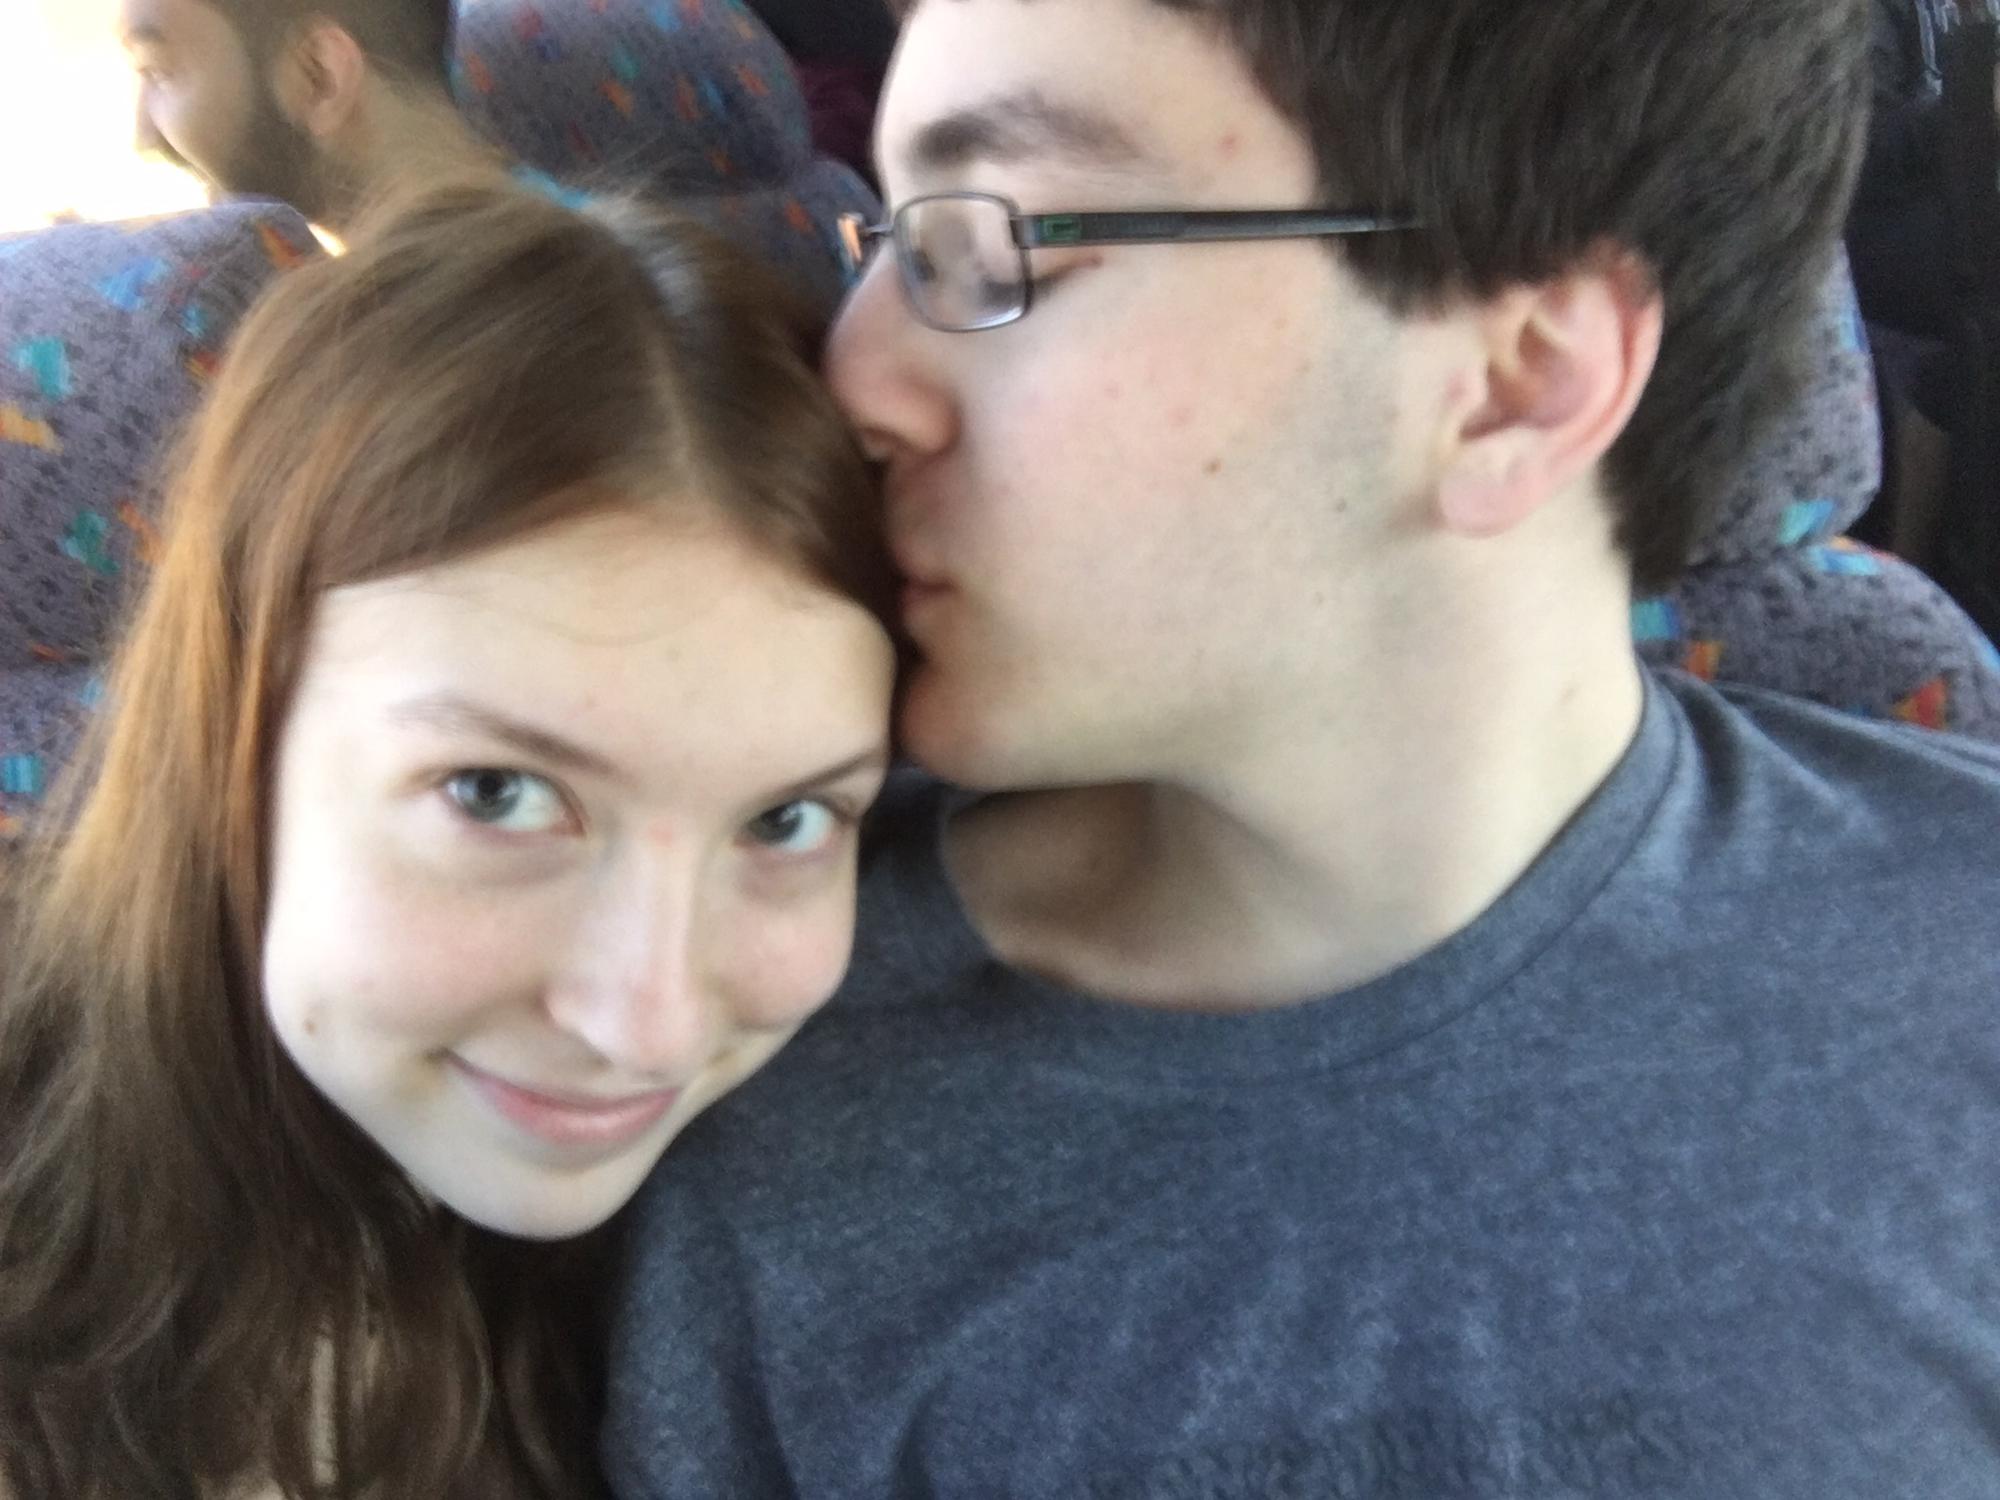 April 15th, 2016: On the bus to the airport for our school trip to Europe!